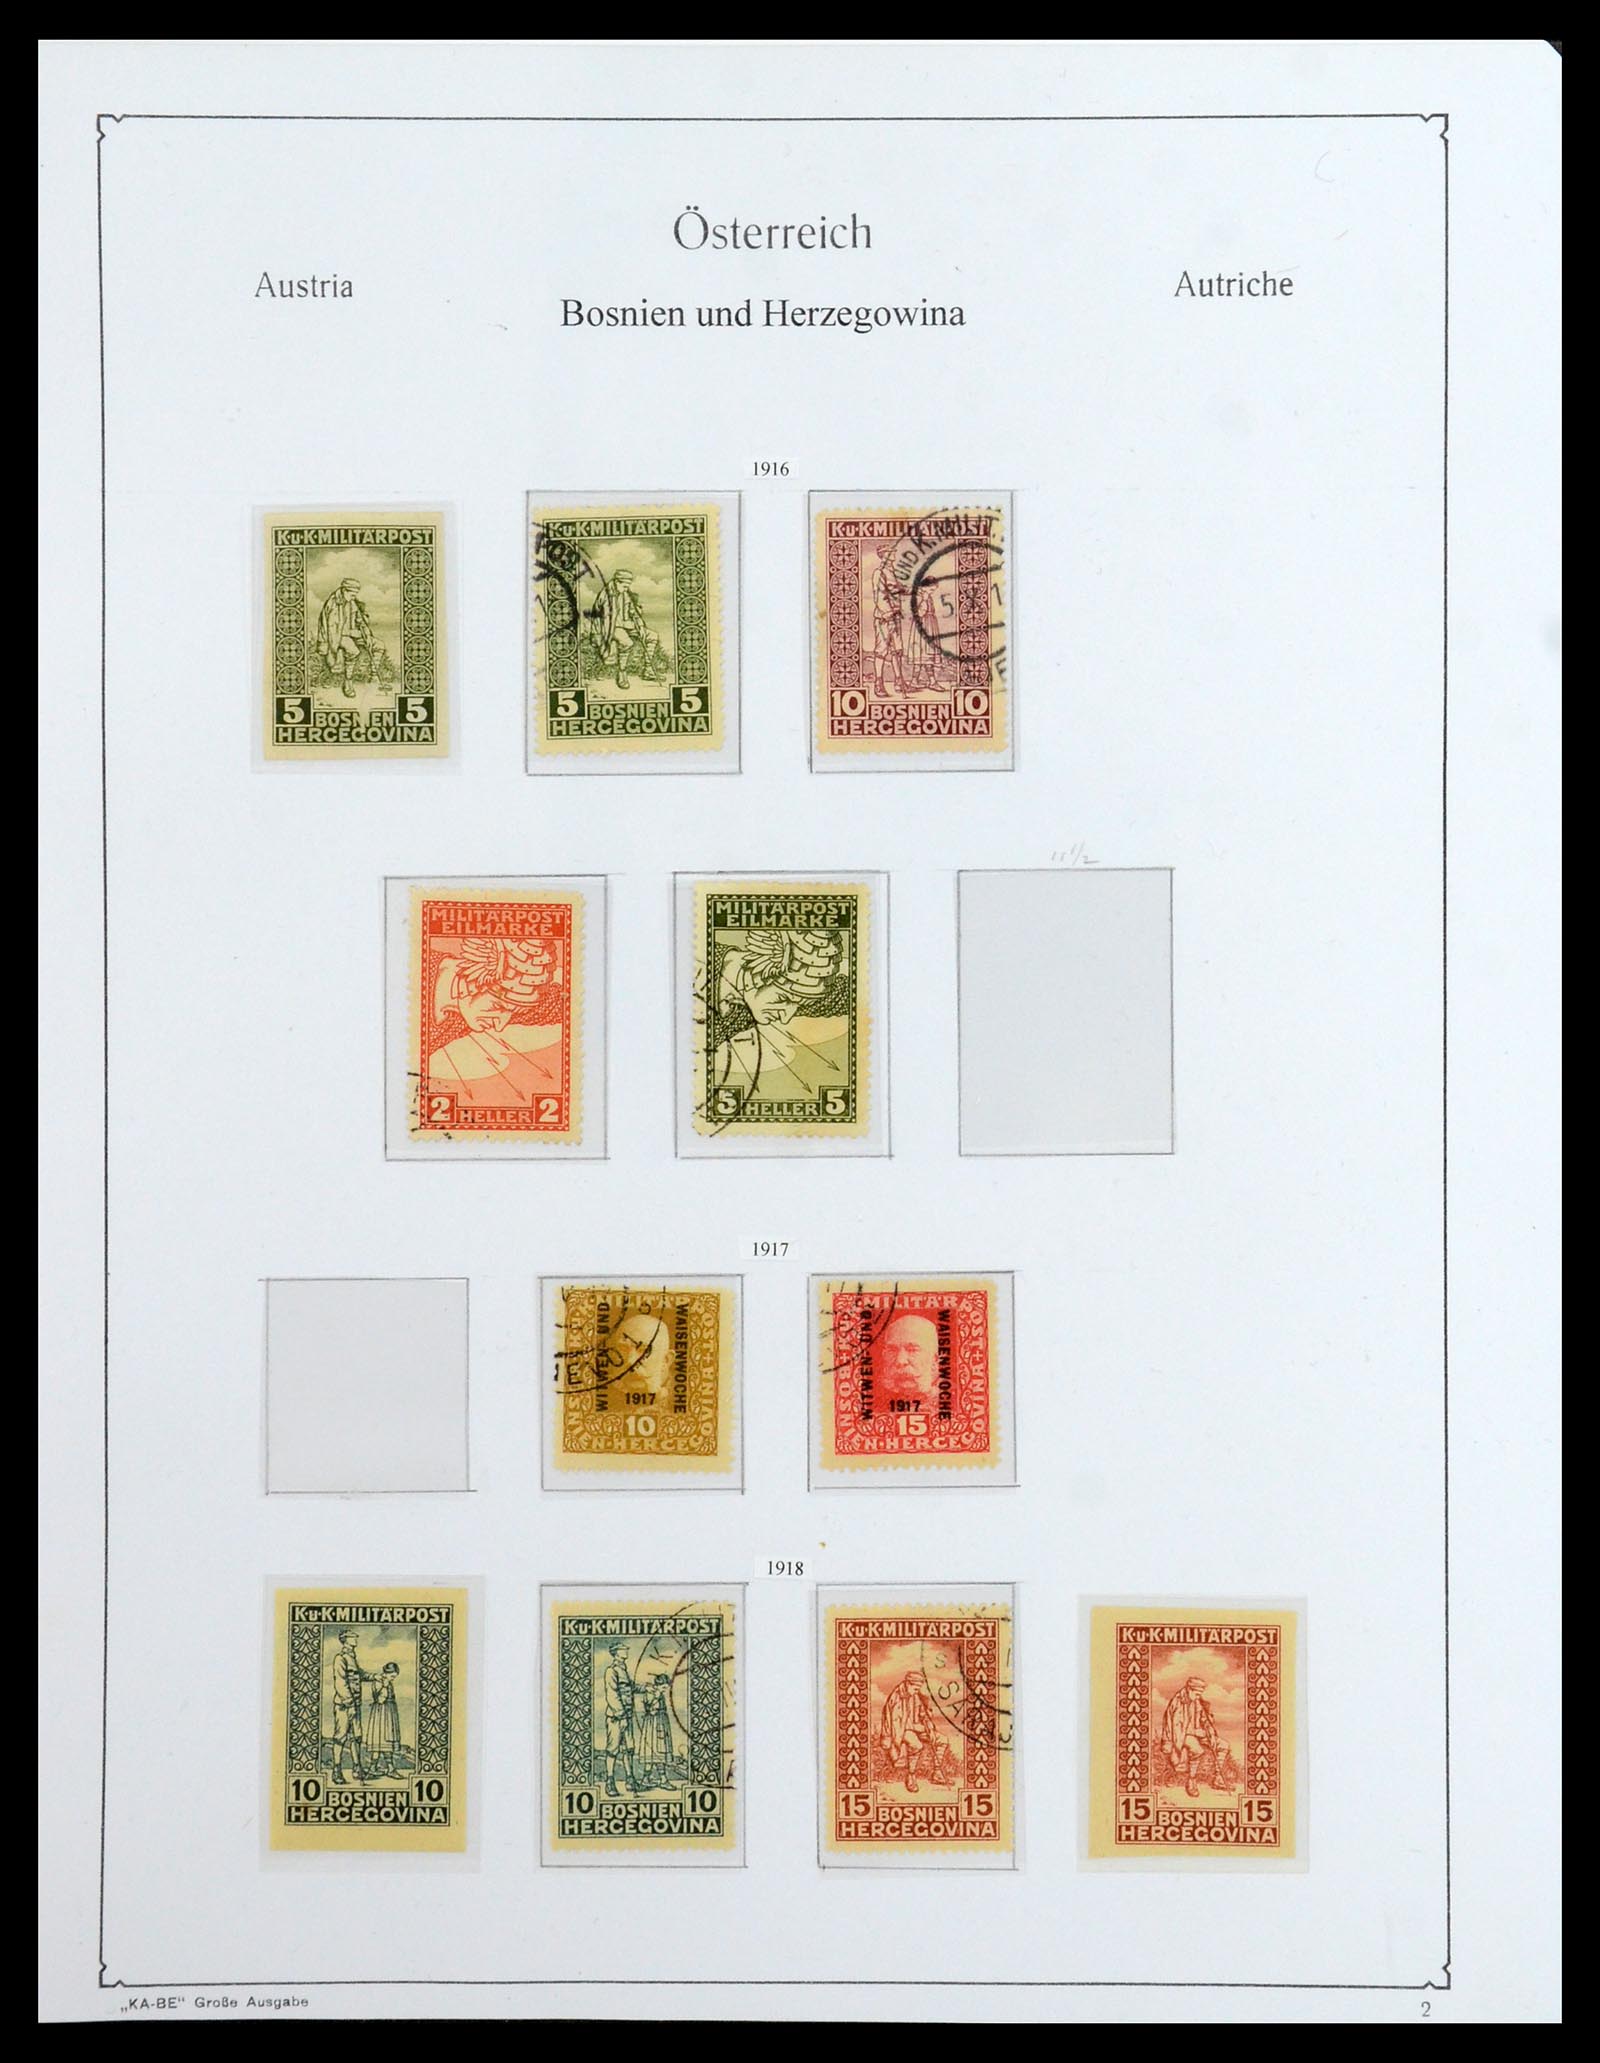 36364 017 - Stamp collection 36364 Austrian territories 1879-1918.